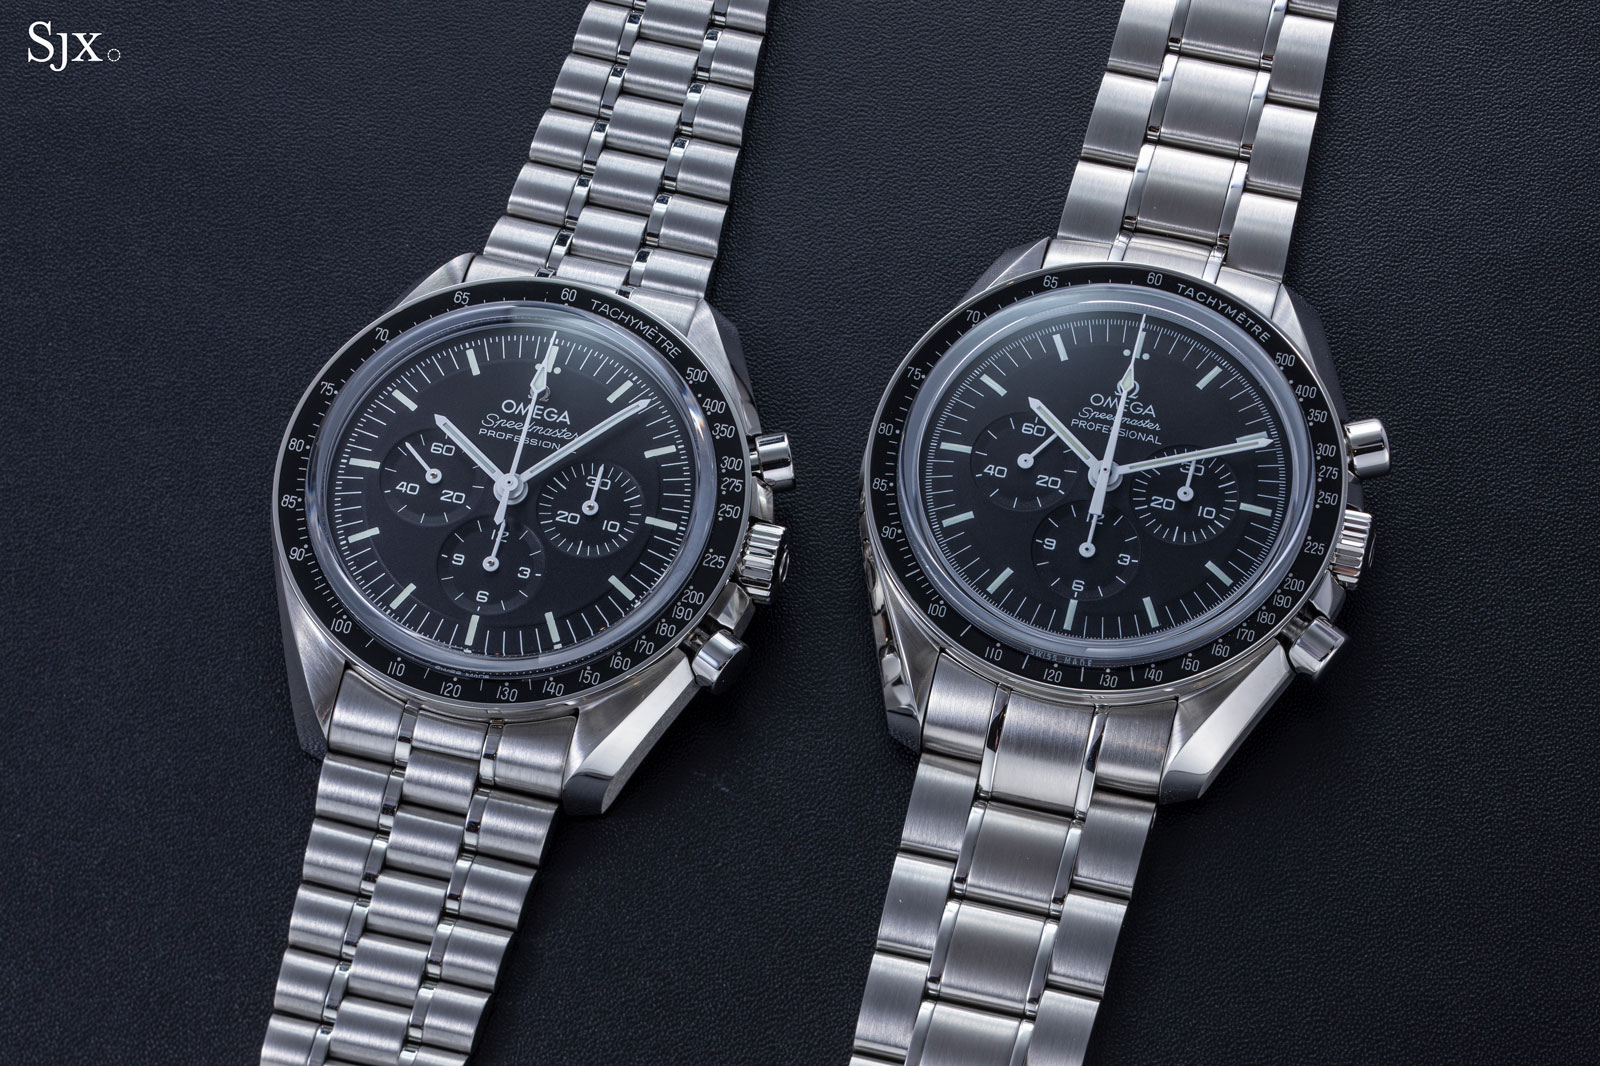 A Year With The Omega Speedmaster - Hands On Review (Updated 2021)